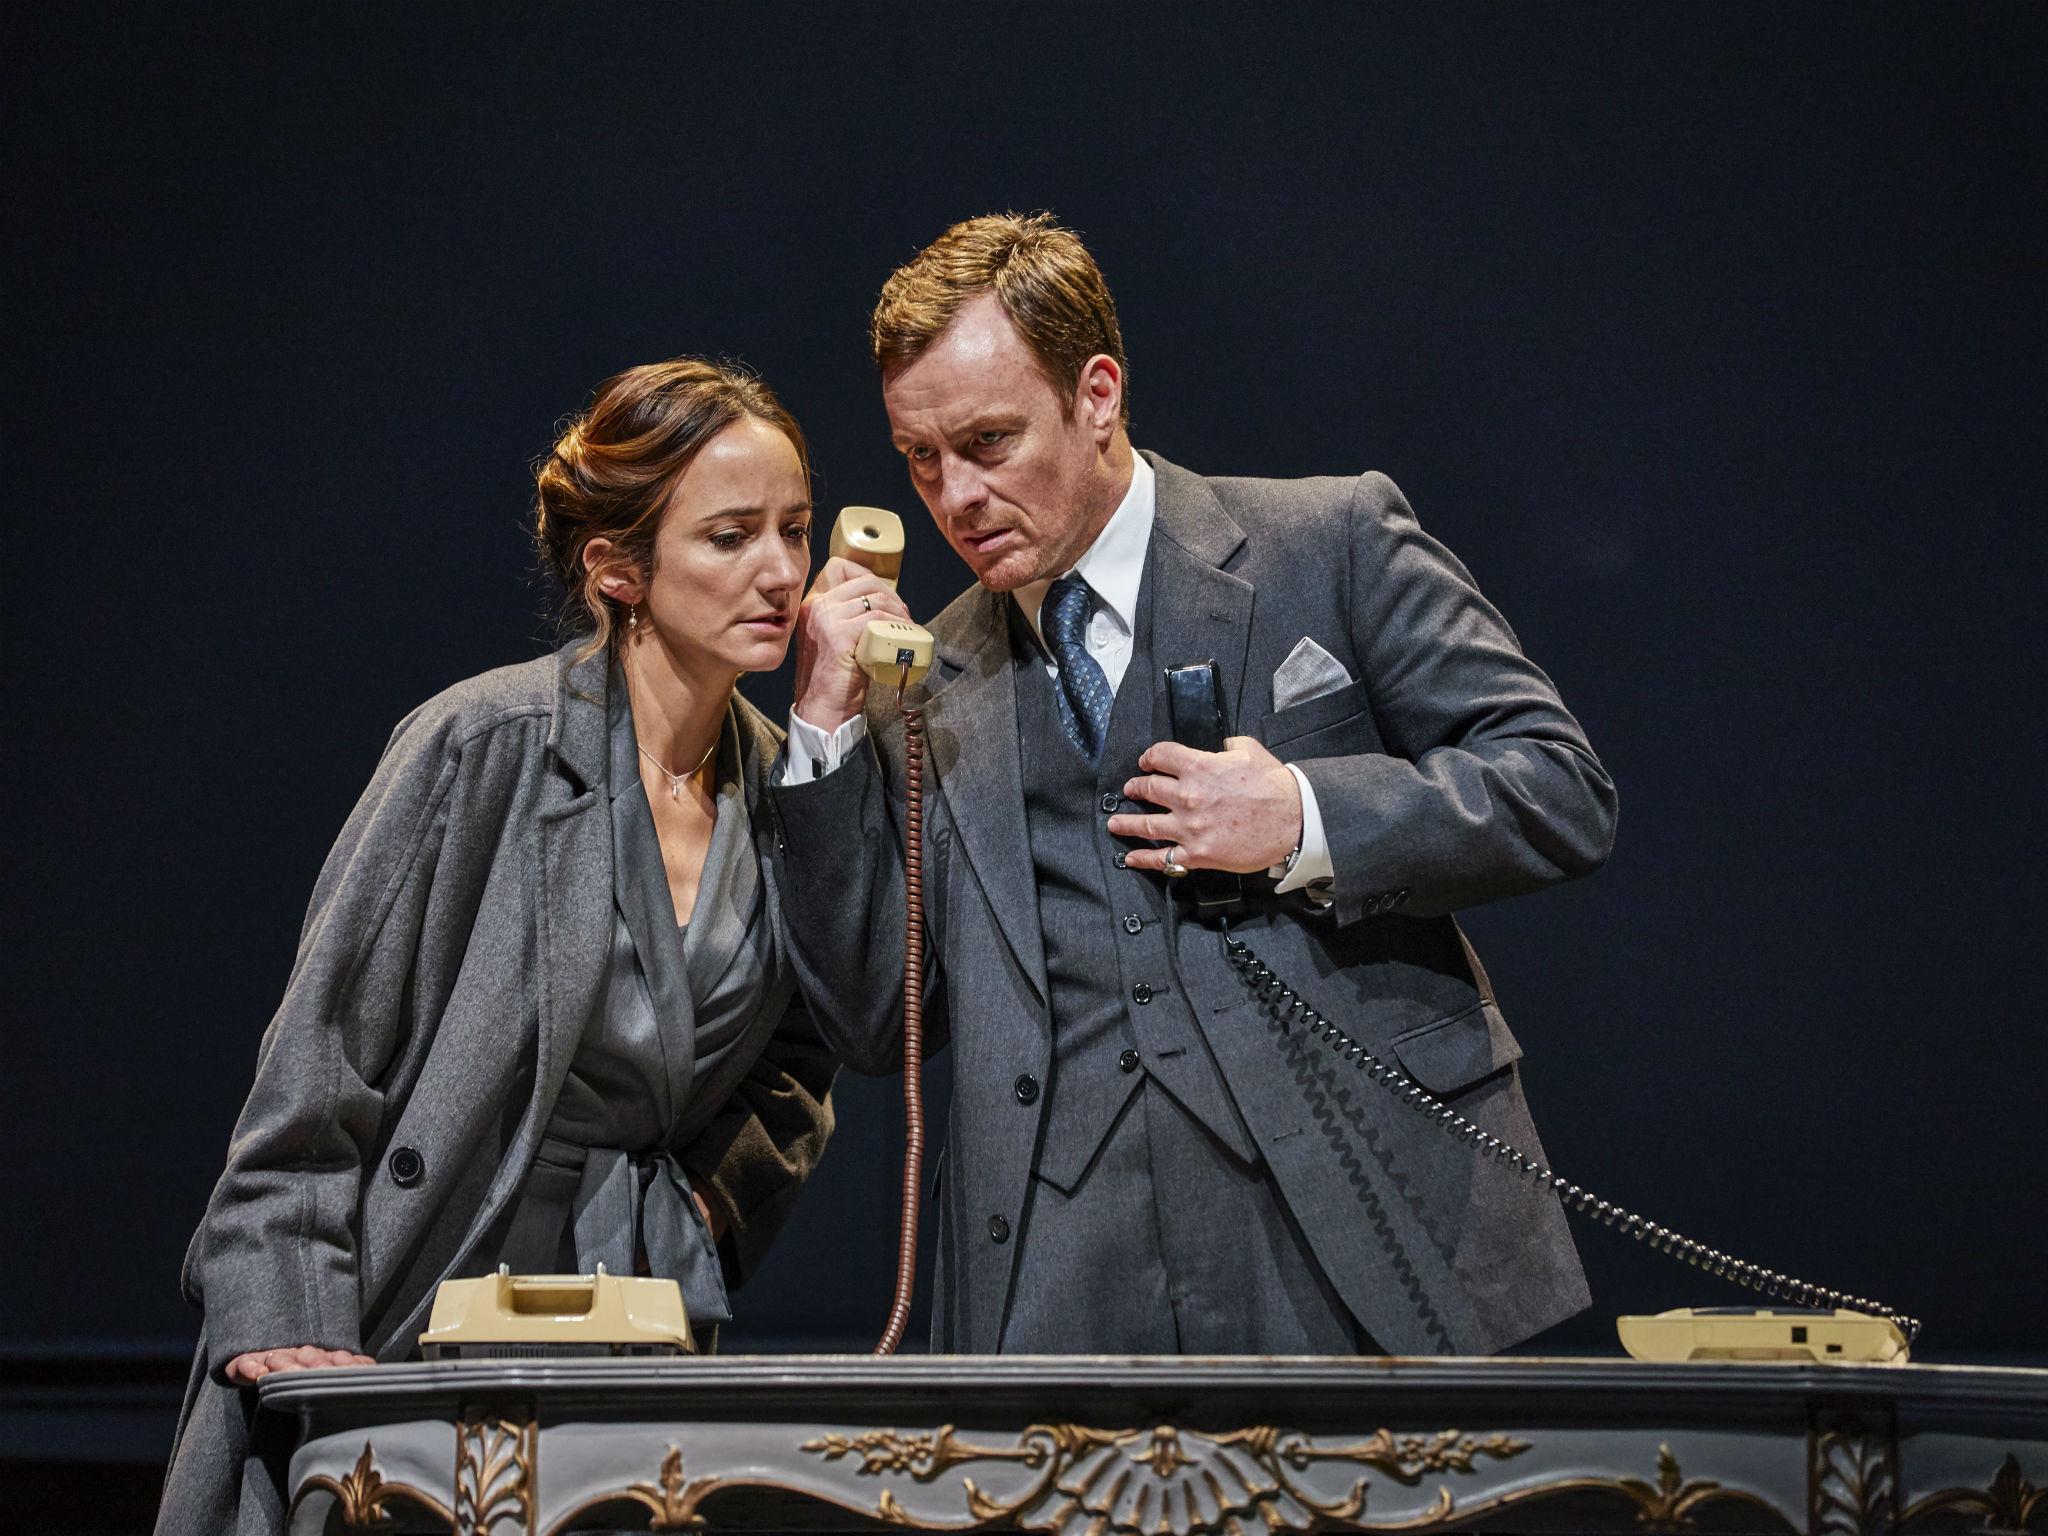 Toby Stephens as Terje Larsen and Lydia Leonard as Mona Juul in J.T.Rogers's 'Oslo' at The National Theatre